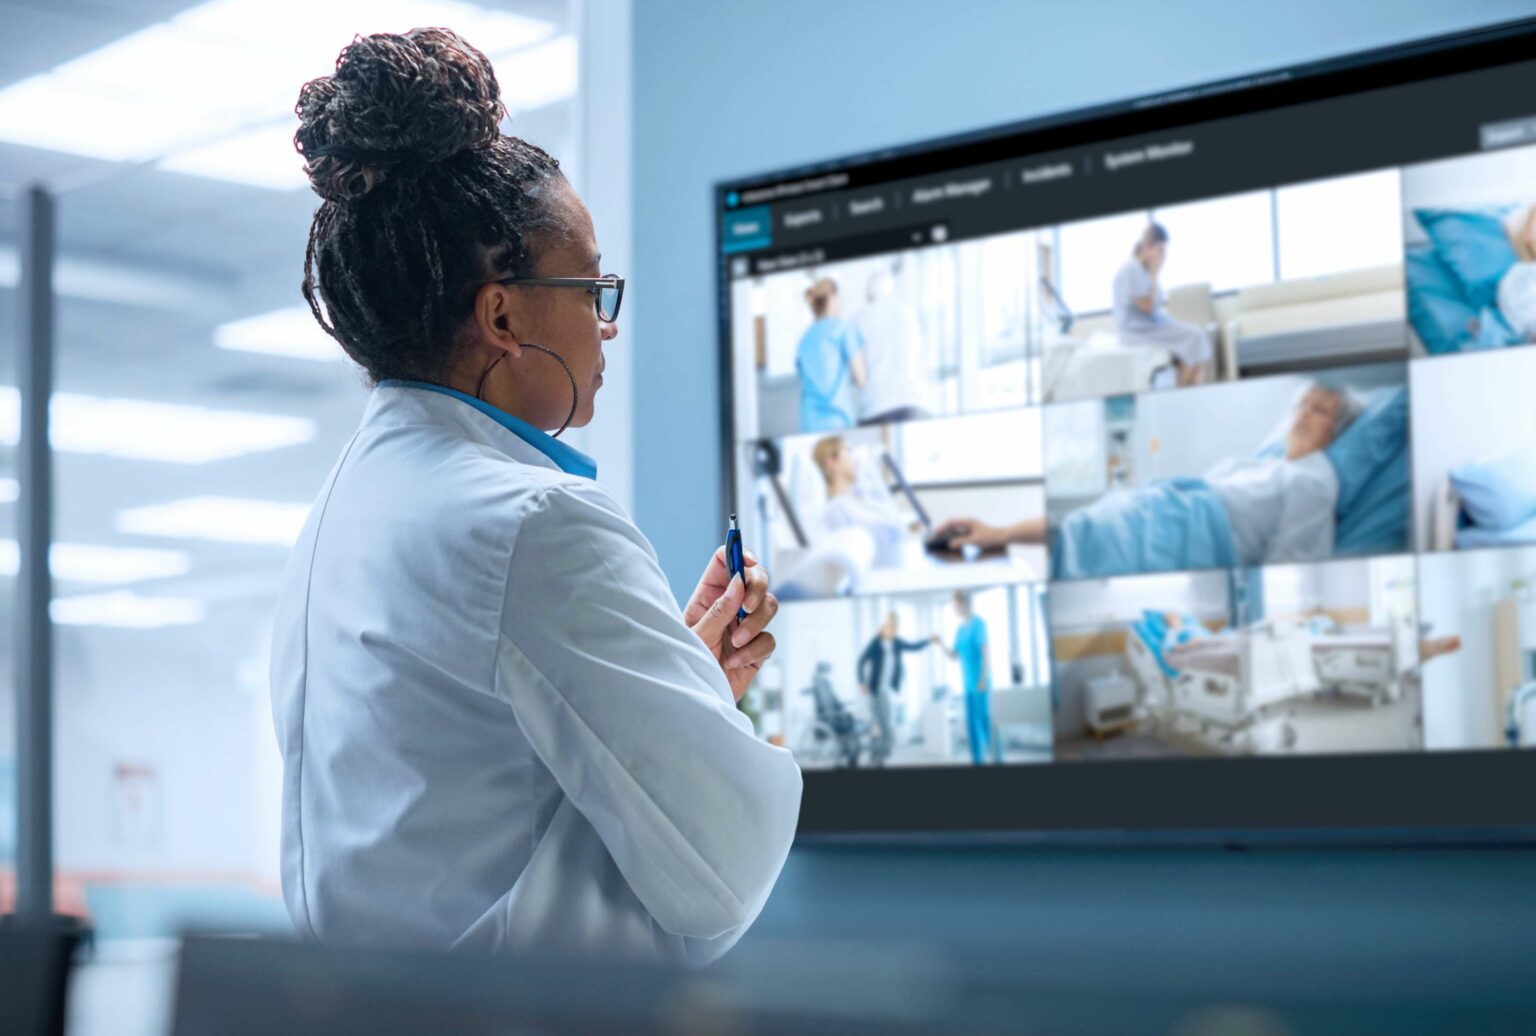 Milestone launches innovative video solution for healthcare environments